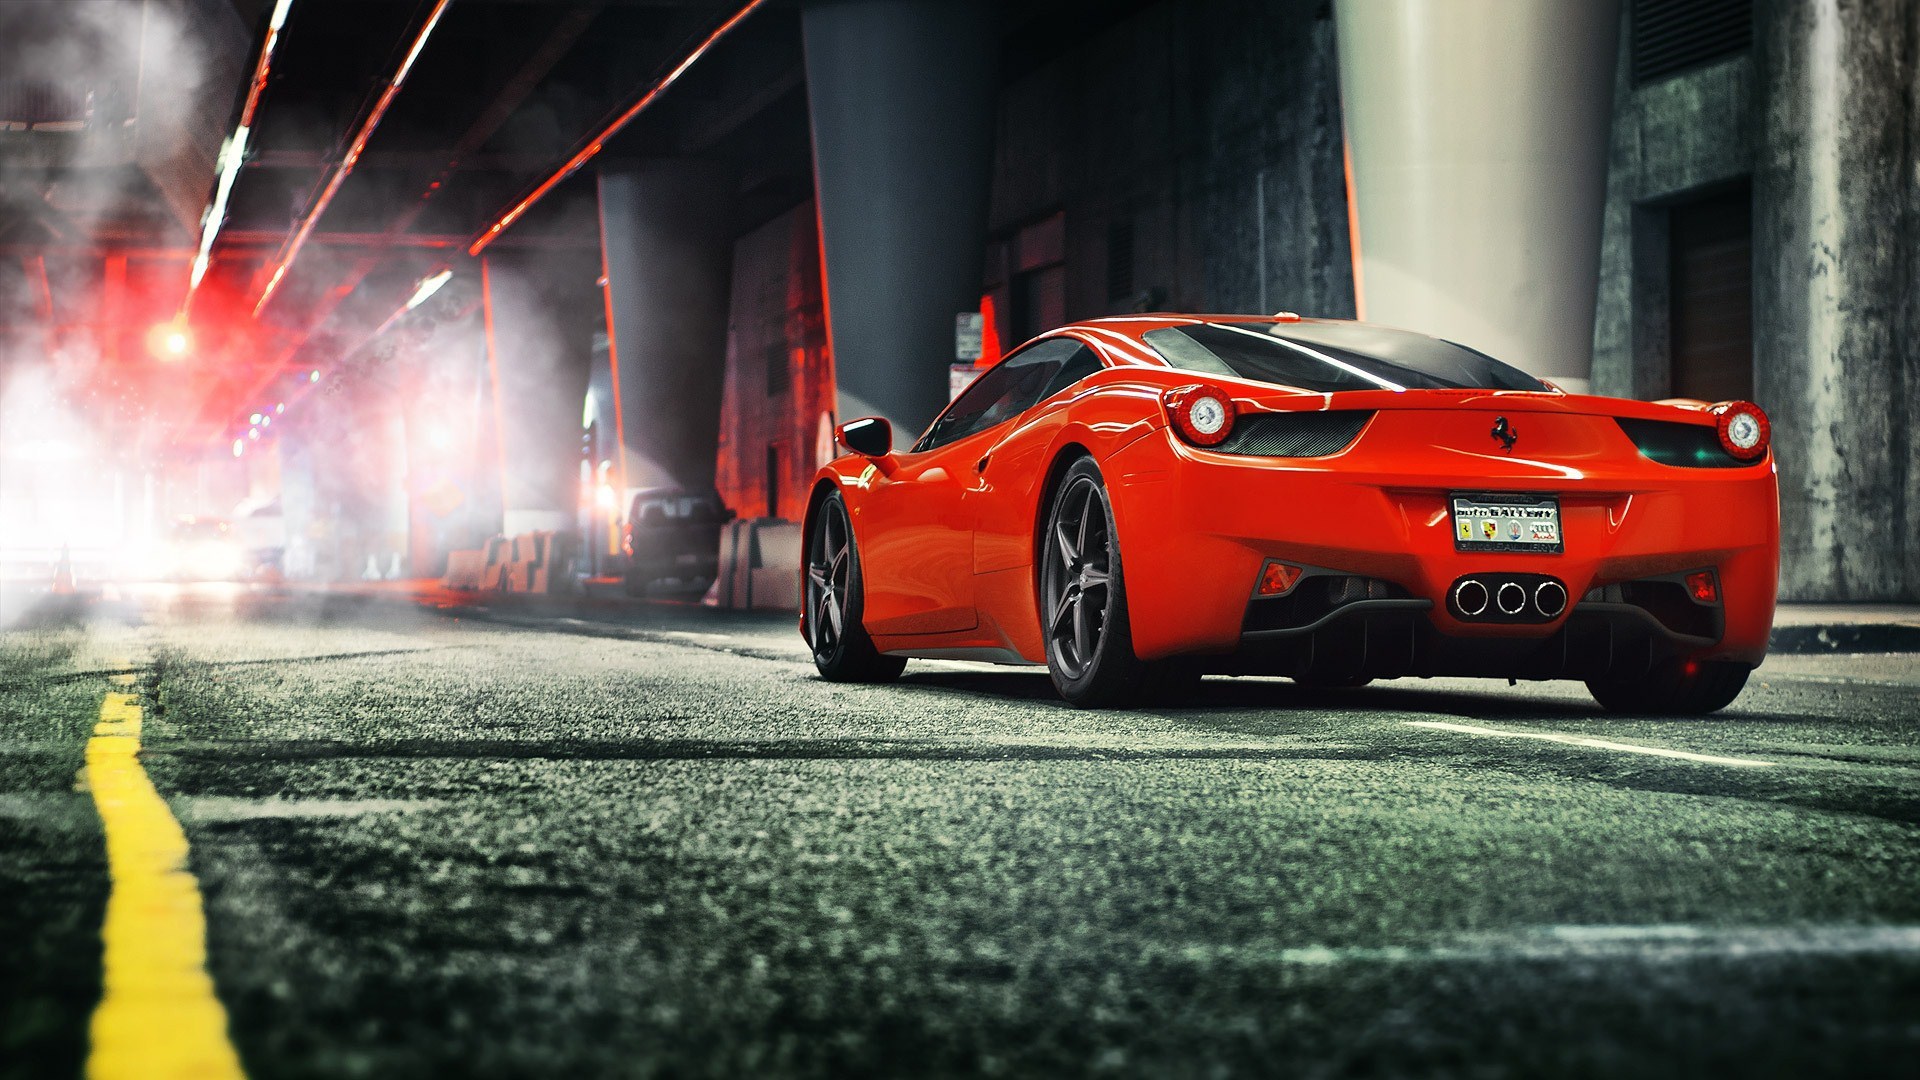 Ferrari 458 Live Background Wallpapers HD Wallpapers   GsFDcY